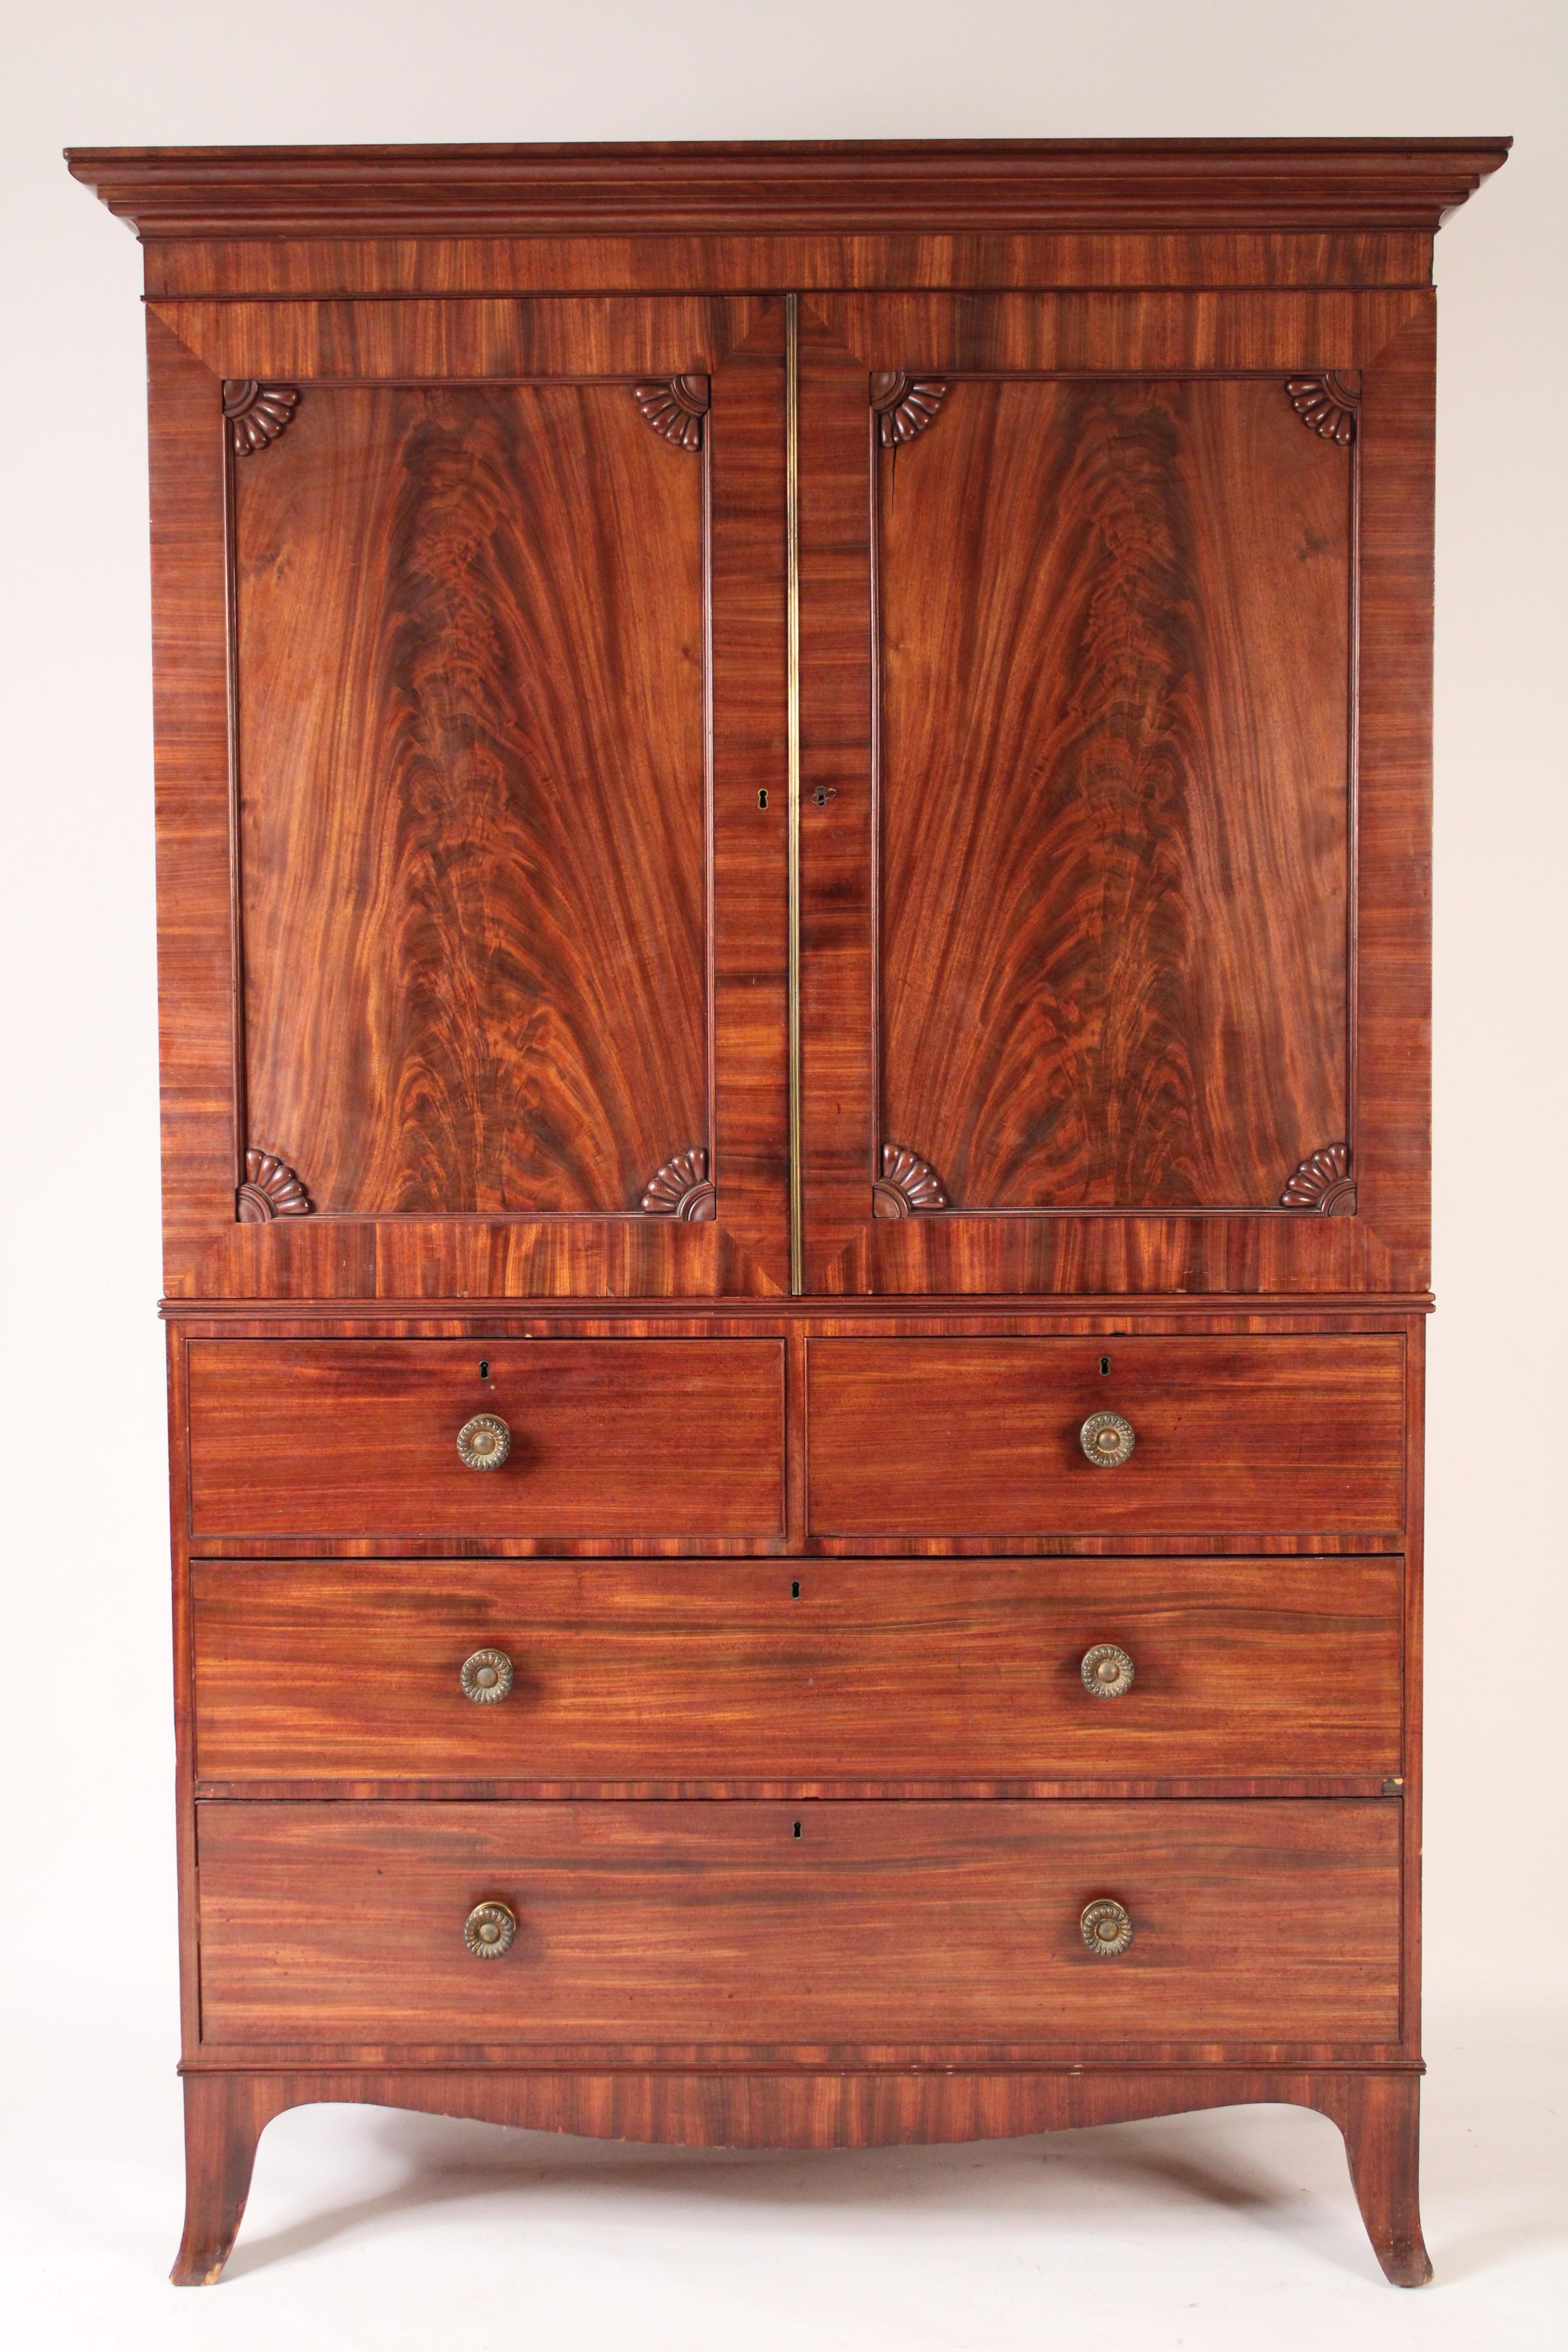 George III Scottish mahogany linen press, early 19th century. With a cove shaped pediment, two flame mahogany doors with shell carved spandrels, the interior of the upper section with 5 drawers, the bottom section with two upper drawers and two